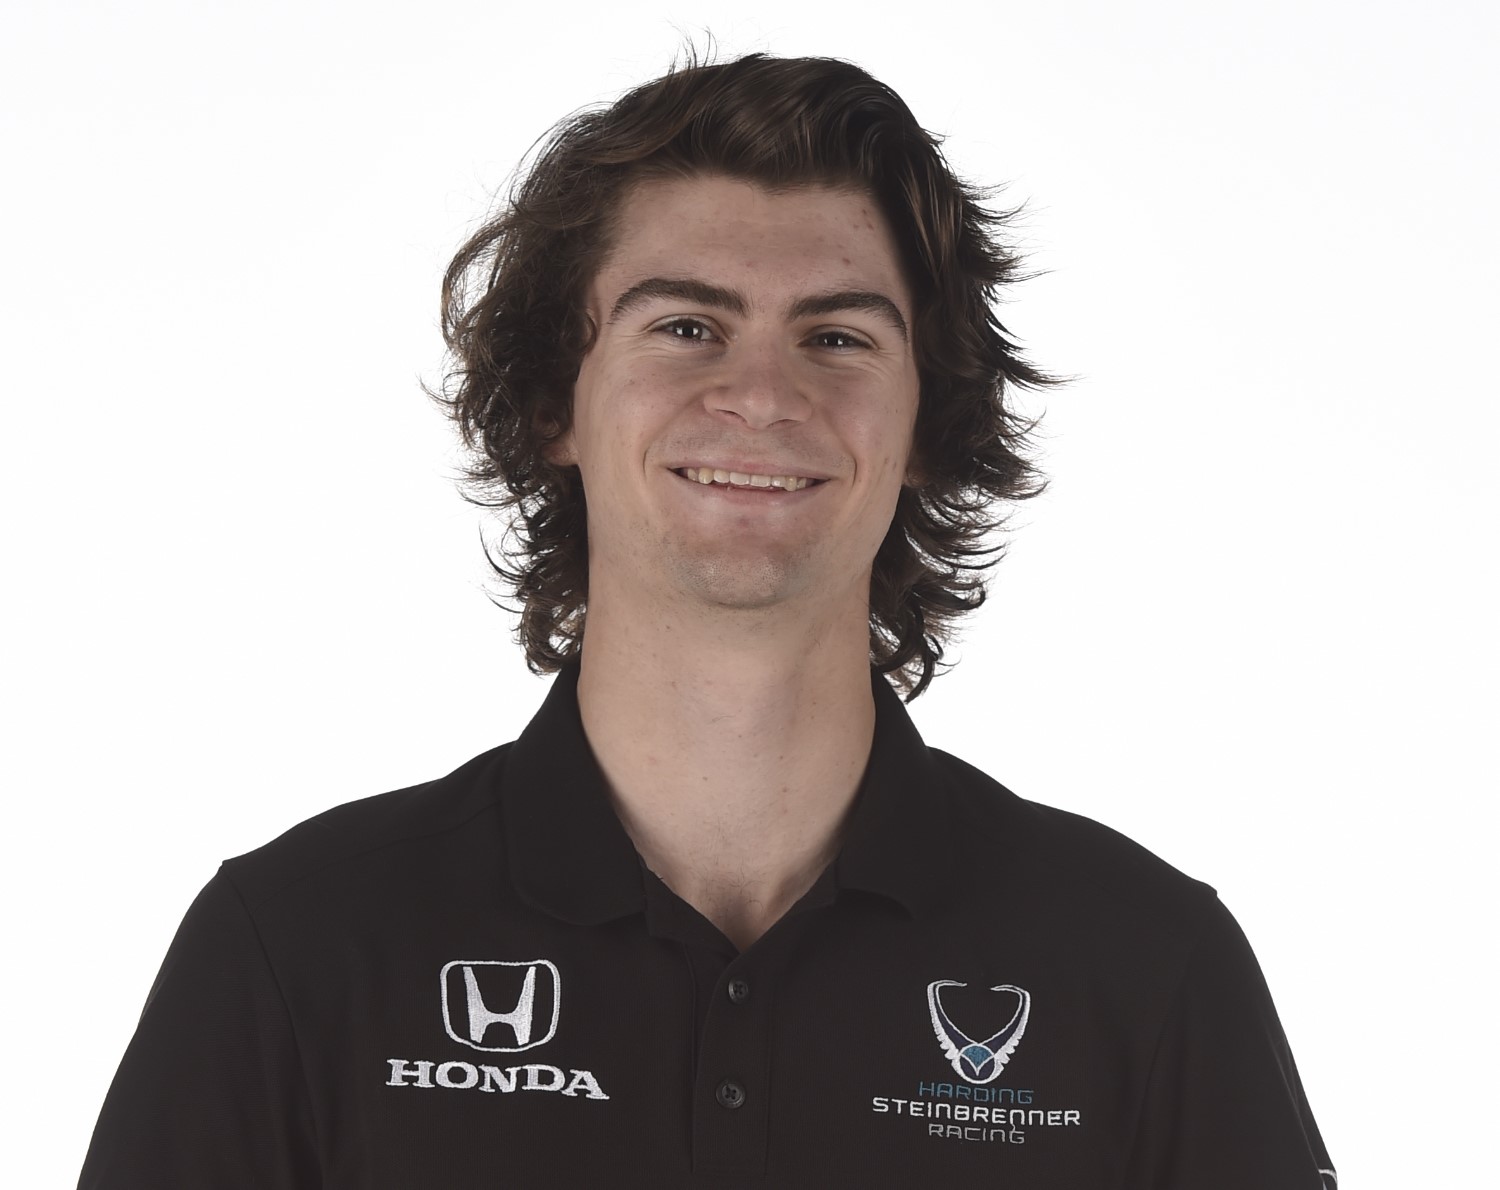 Herta will either drive the #88 or the #98 in 2020